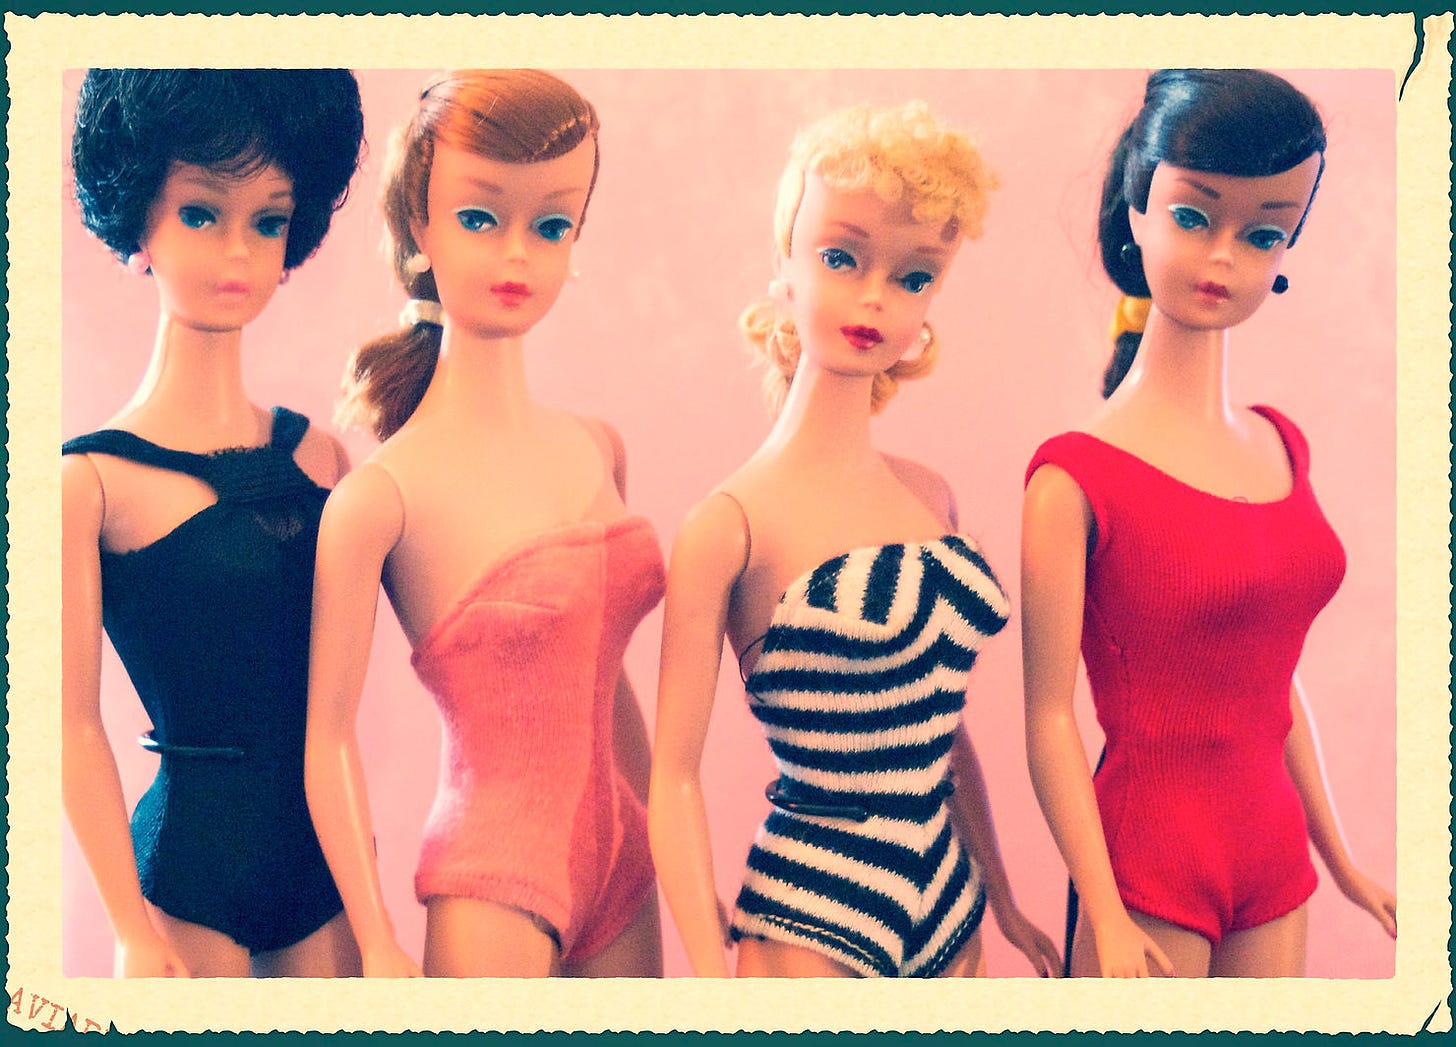 Vintage Barbie dolls show that aging for women is not easy! Image from RomitaGirl67